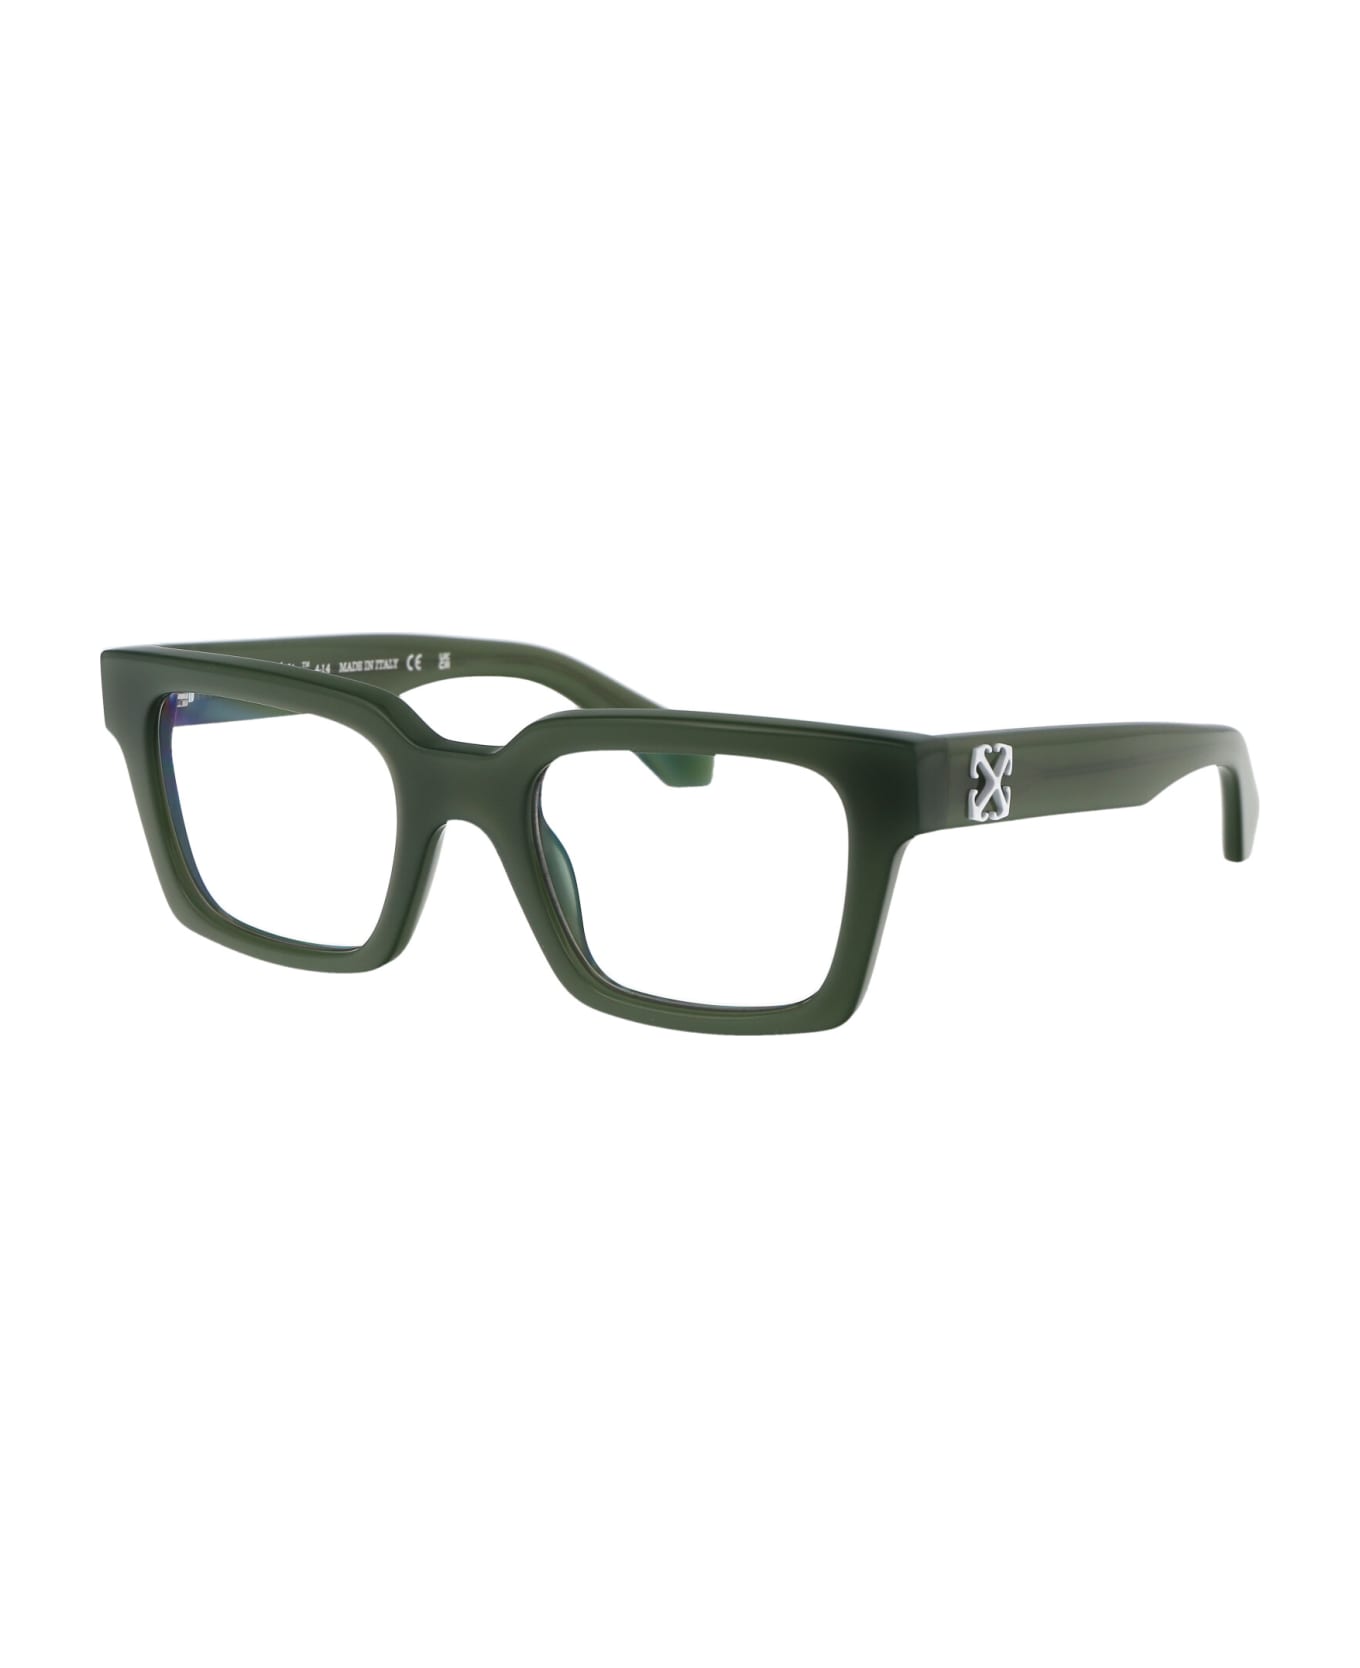 Off-White Optical Style 72 Glasses - 5900 SAGE GREEN